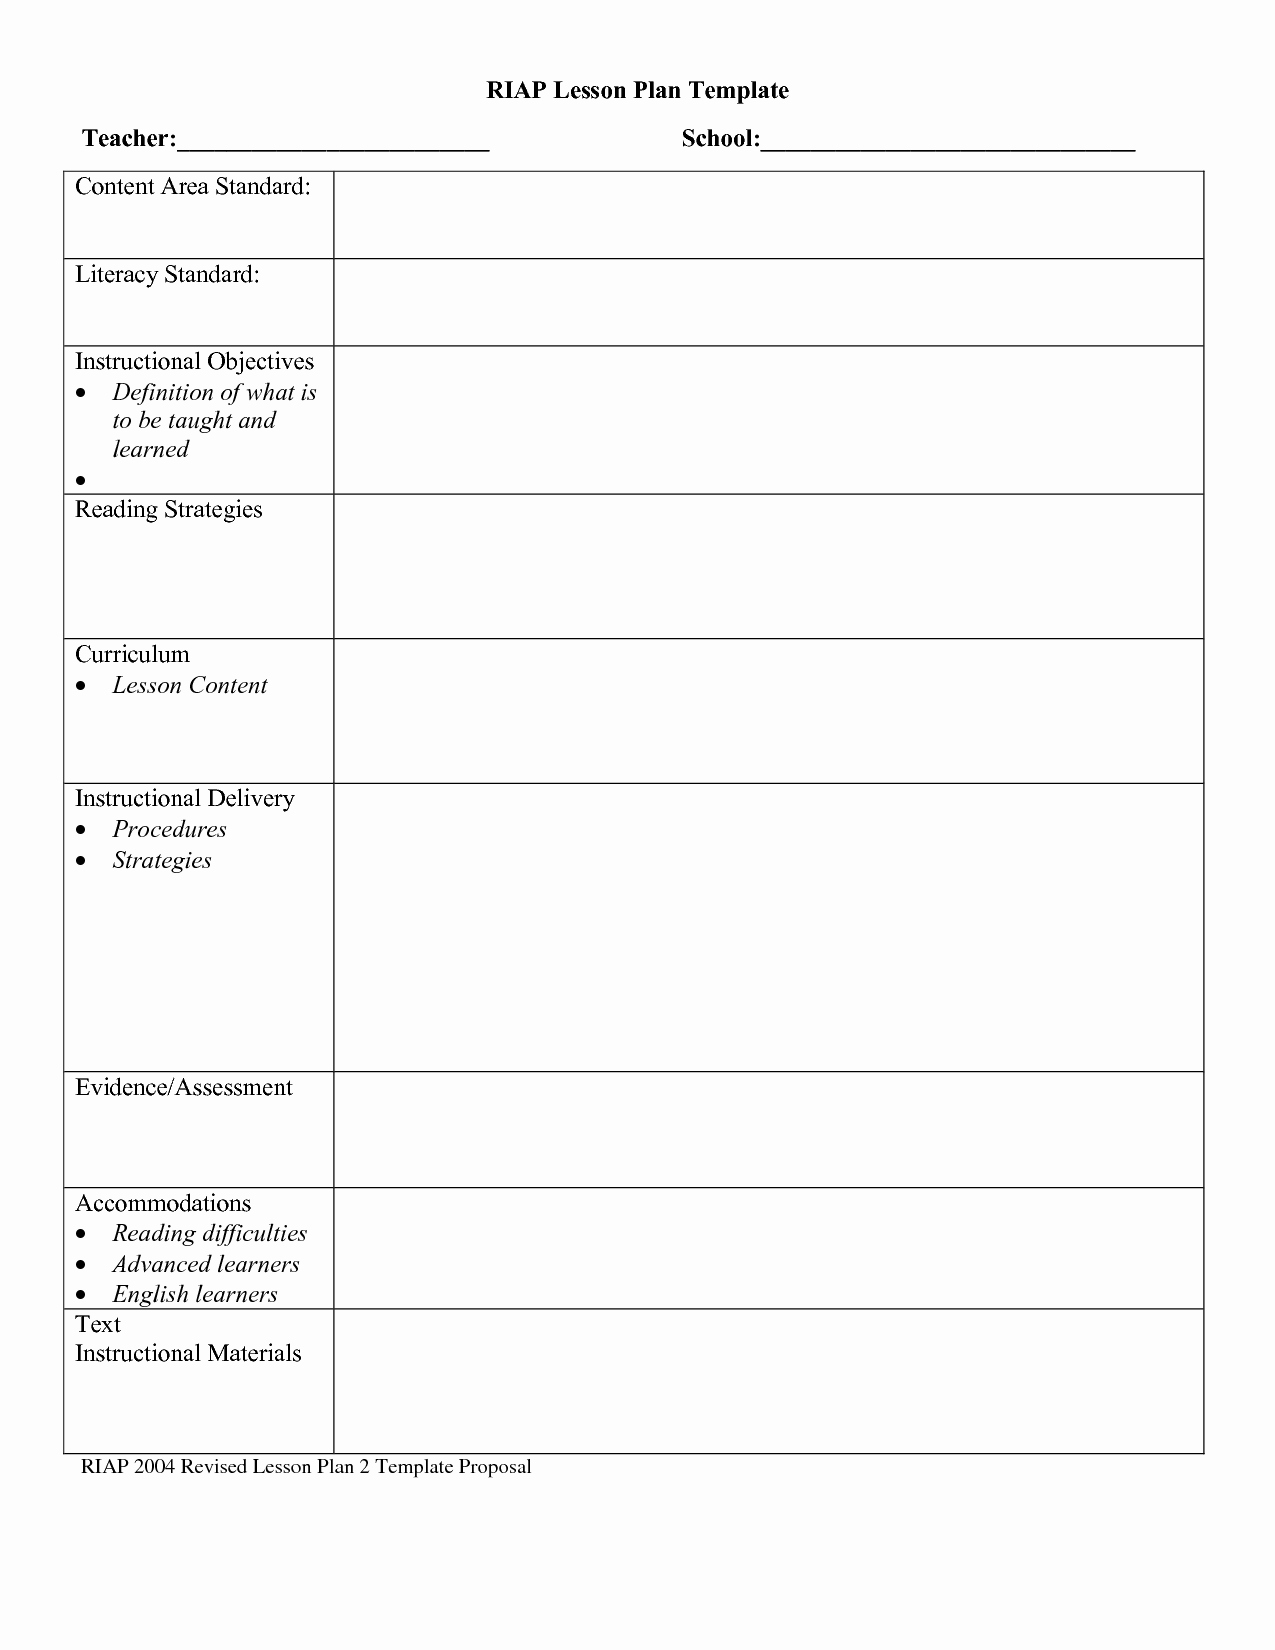 Middle School Lesson Plan Template Luxury Free Lesson Plan Templates for Middle School